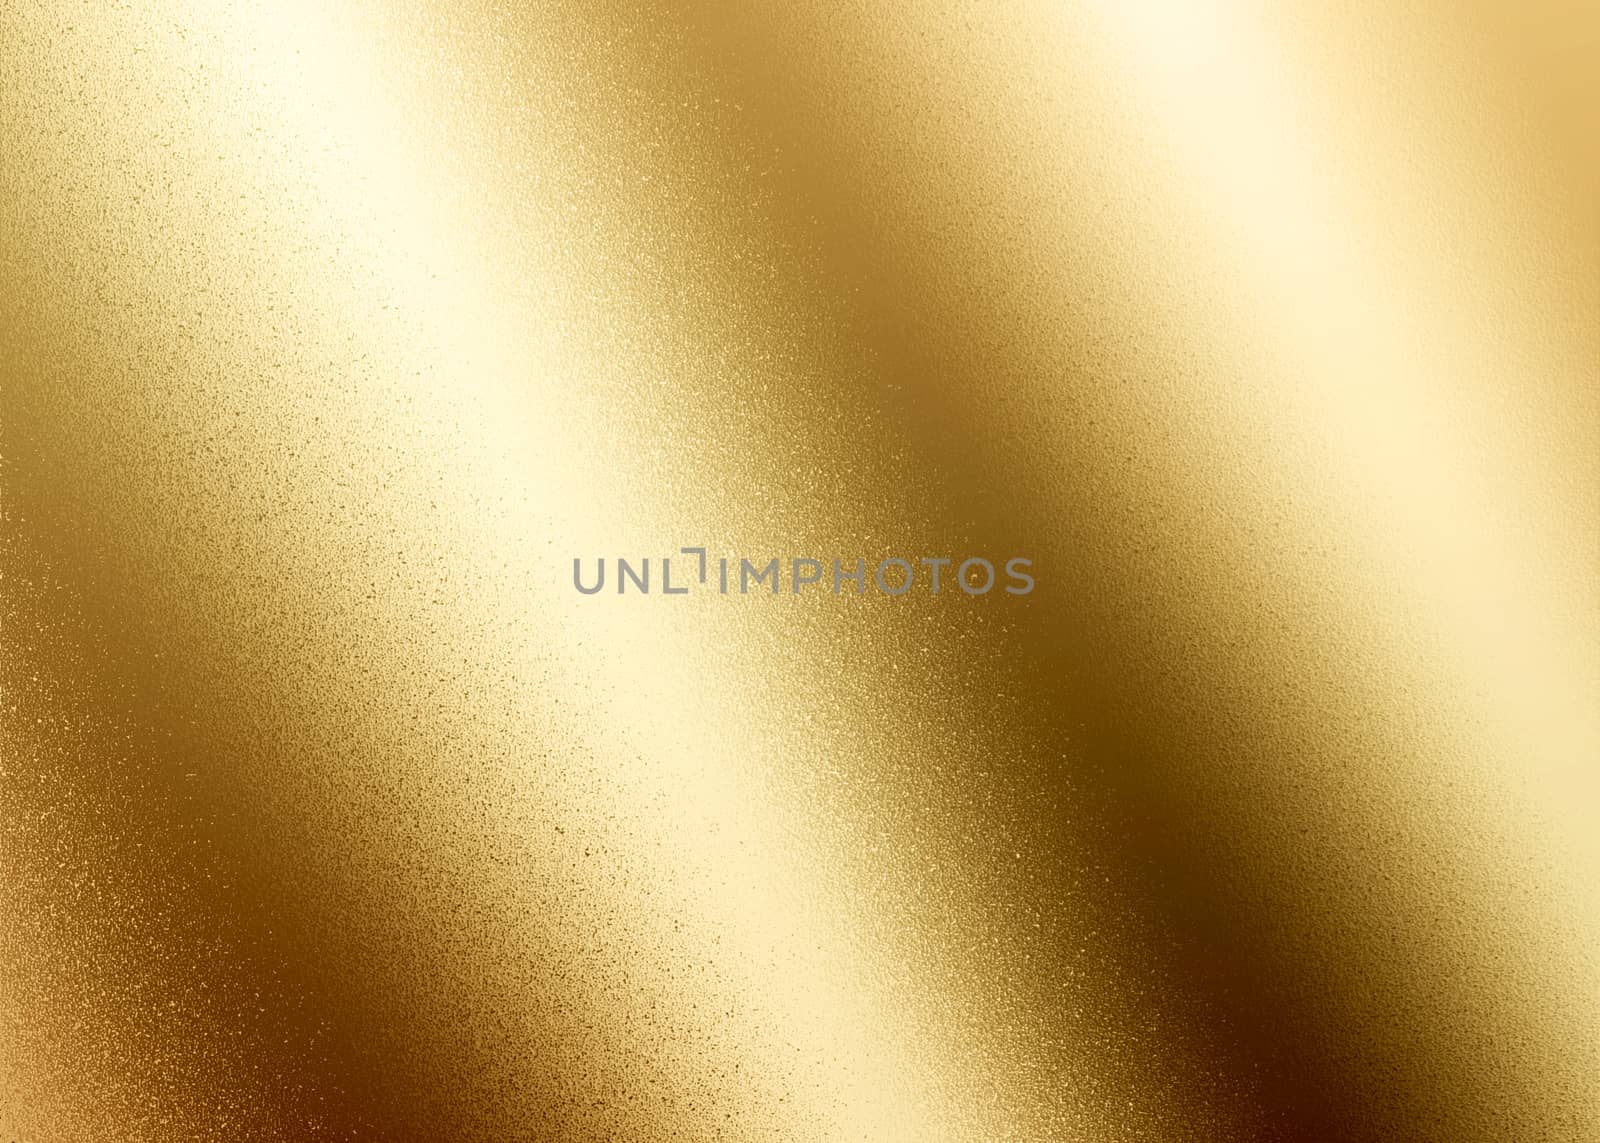 The golden shiny abstract metallic textured background